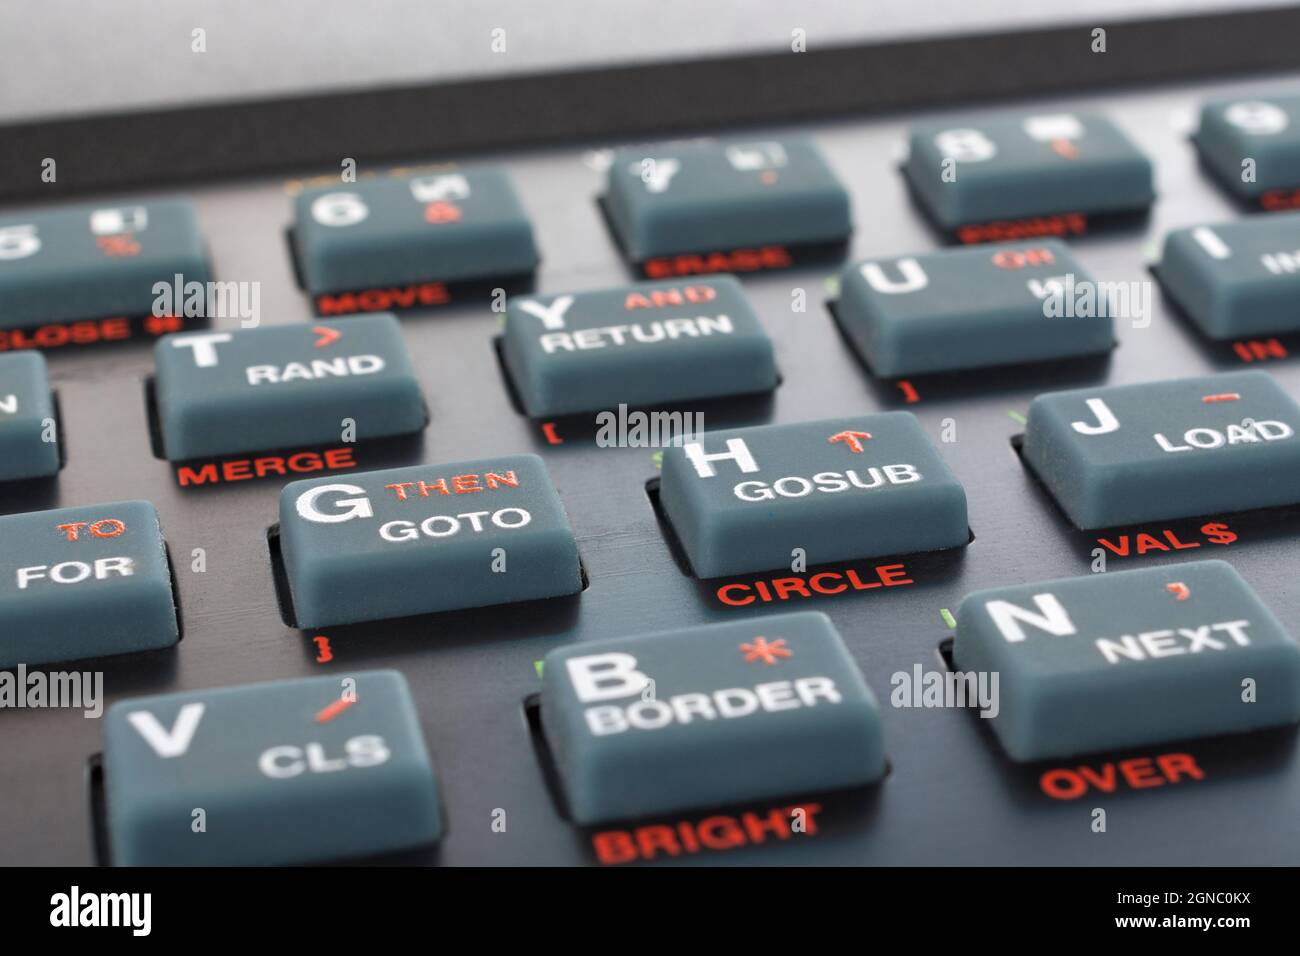 Sinclair ZX Spectrum keyboard close-up. Focus on Basic THEN / GOTO command key. Vintage 8-bit home computer from 1980s (see Notes). Stock Photo